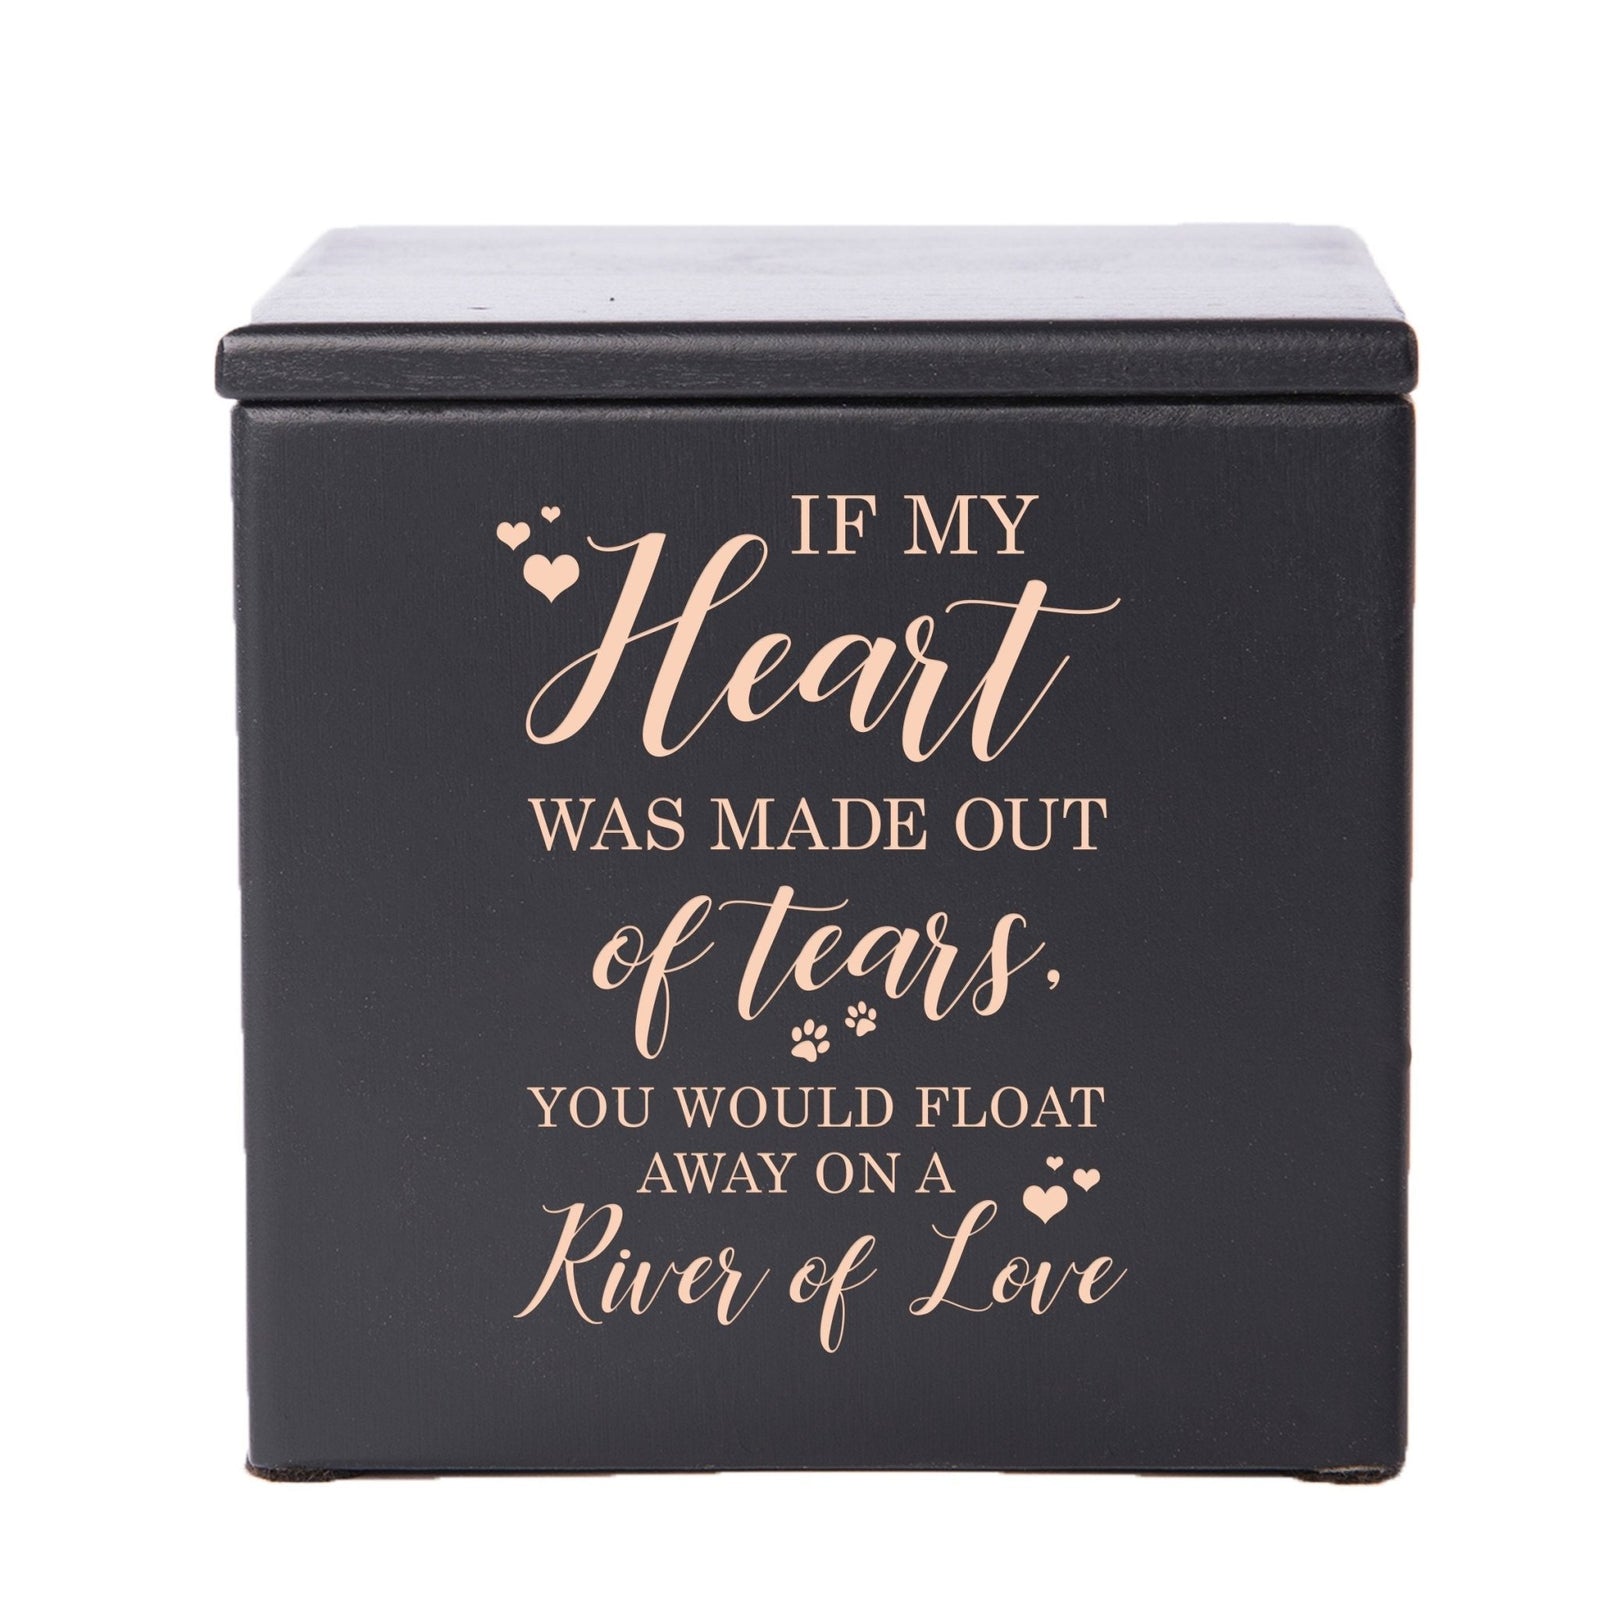 Pet Memorial Keepsake Cremation Urn Box for Dog or Cat - If My Heart Was Made Out of Tears - LifeSong Milestones